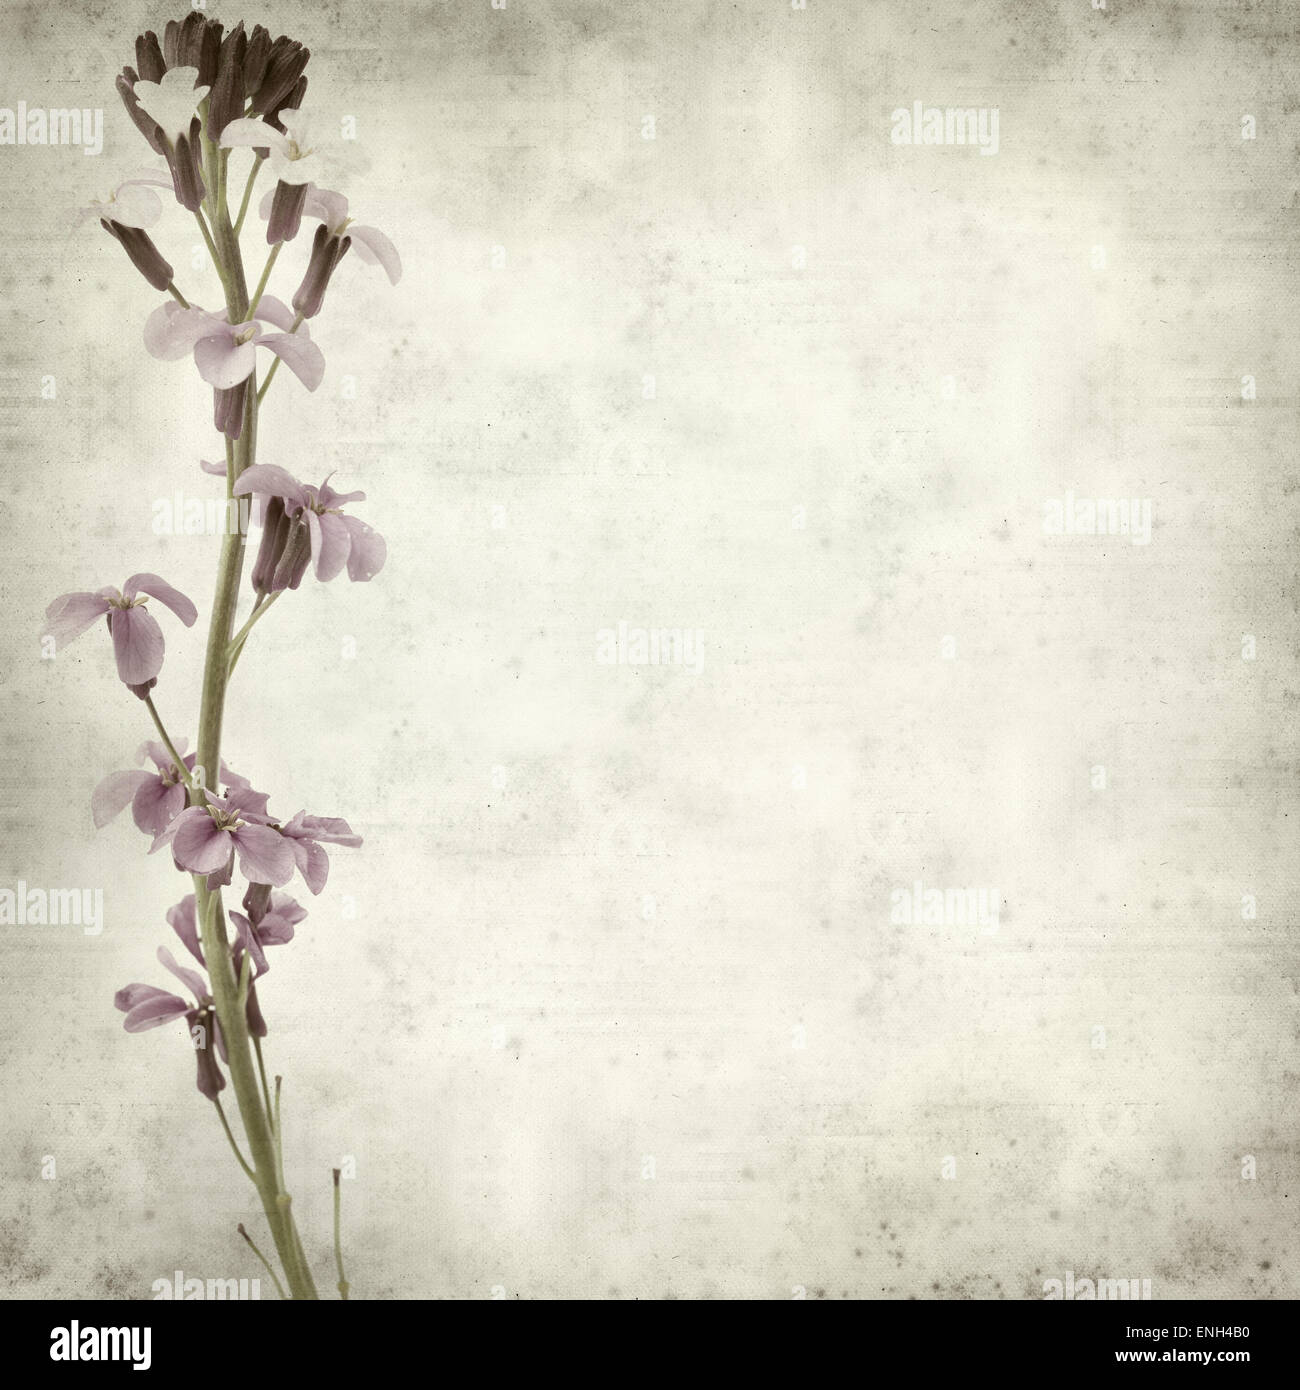 textured old paper background with Erysimum; scoparium, plant endemic to Gran Canaria Stock Photo